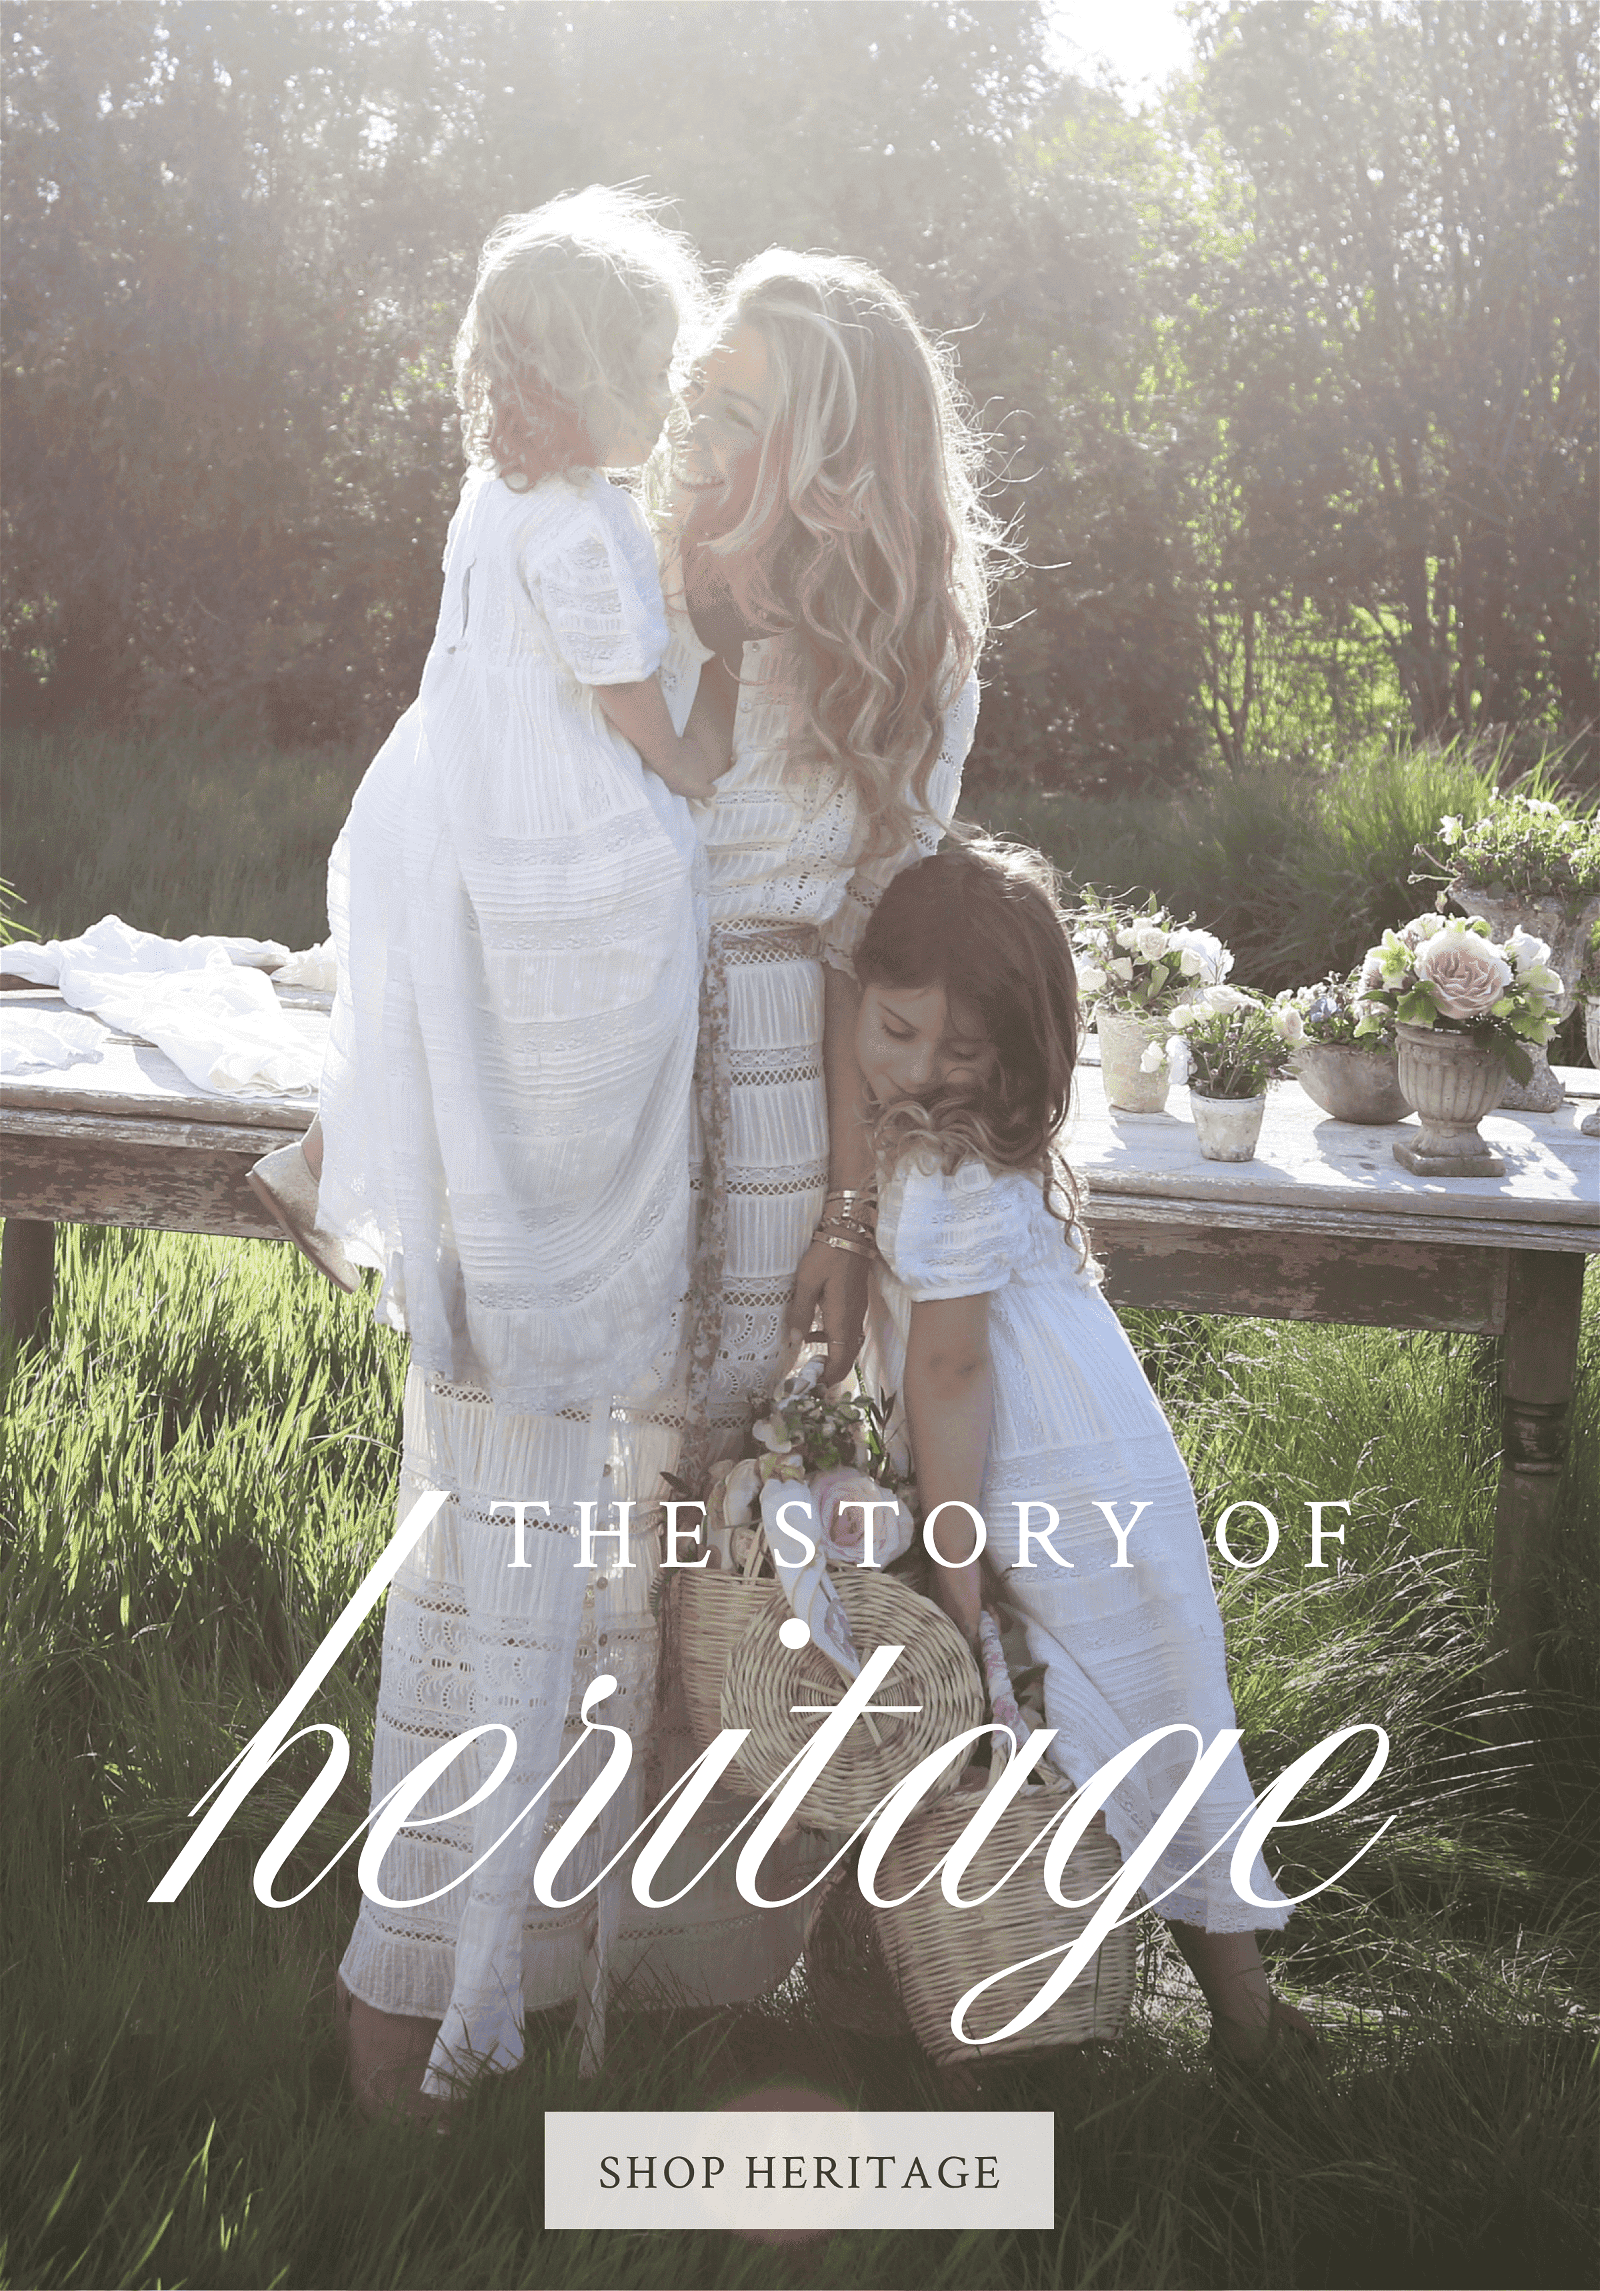 The story of heritage